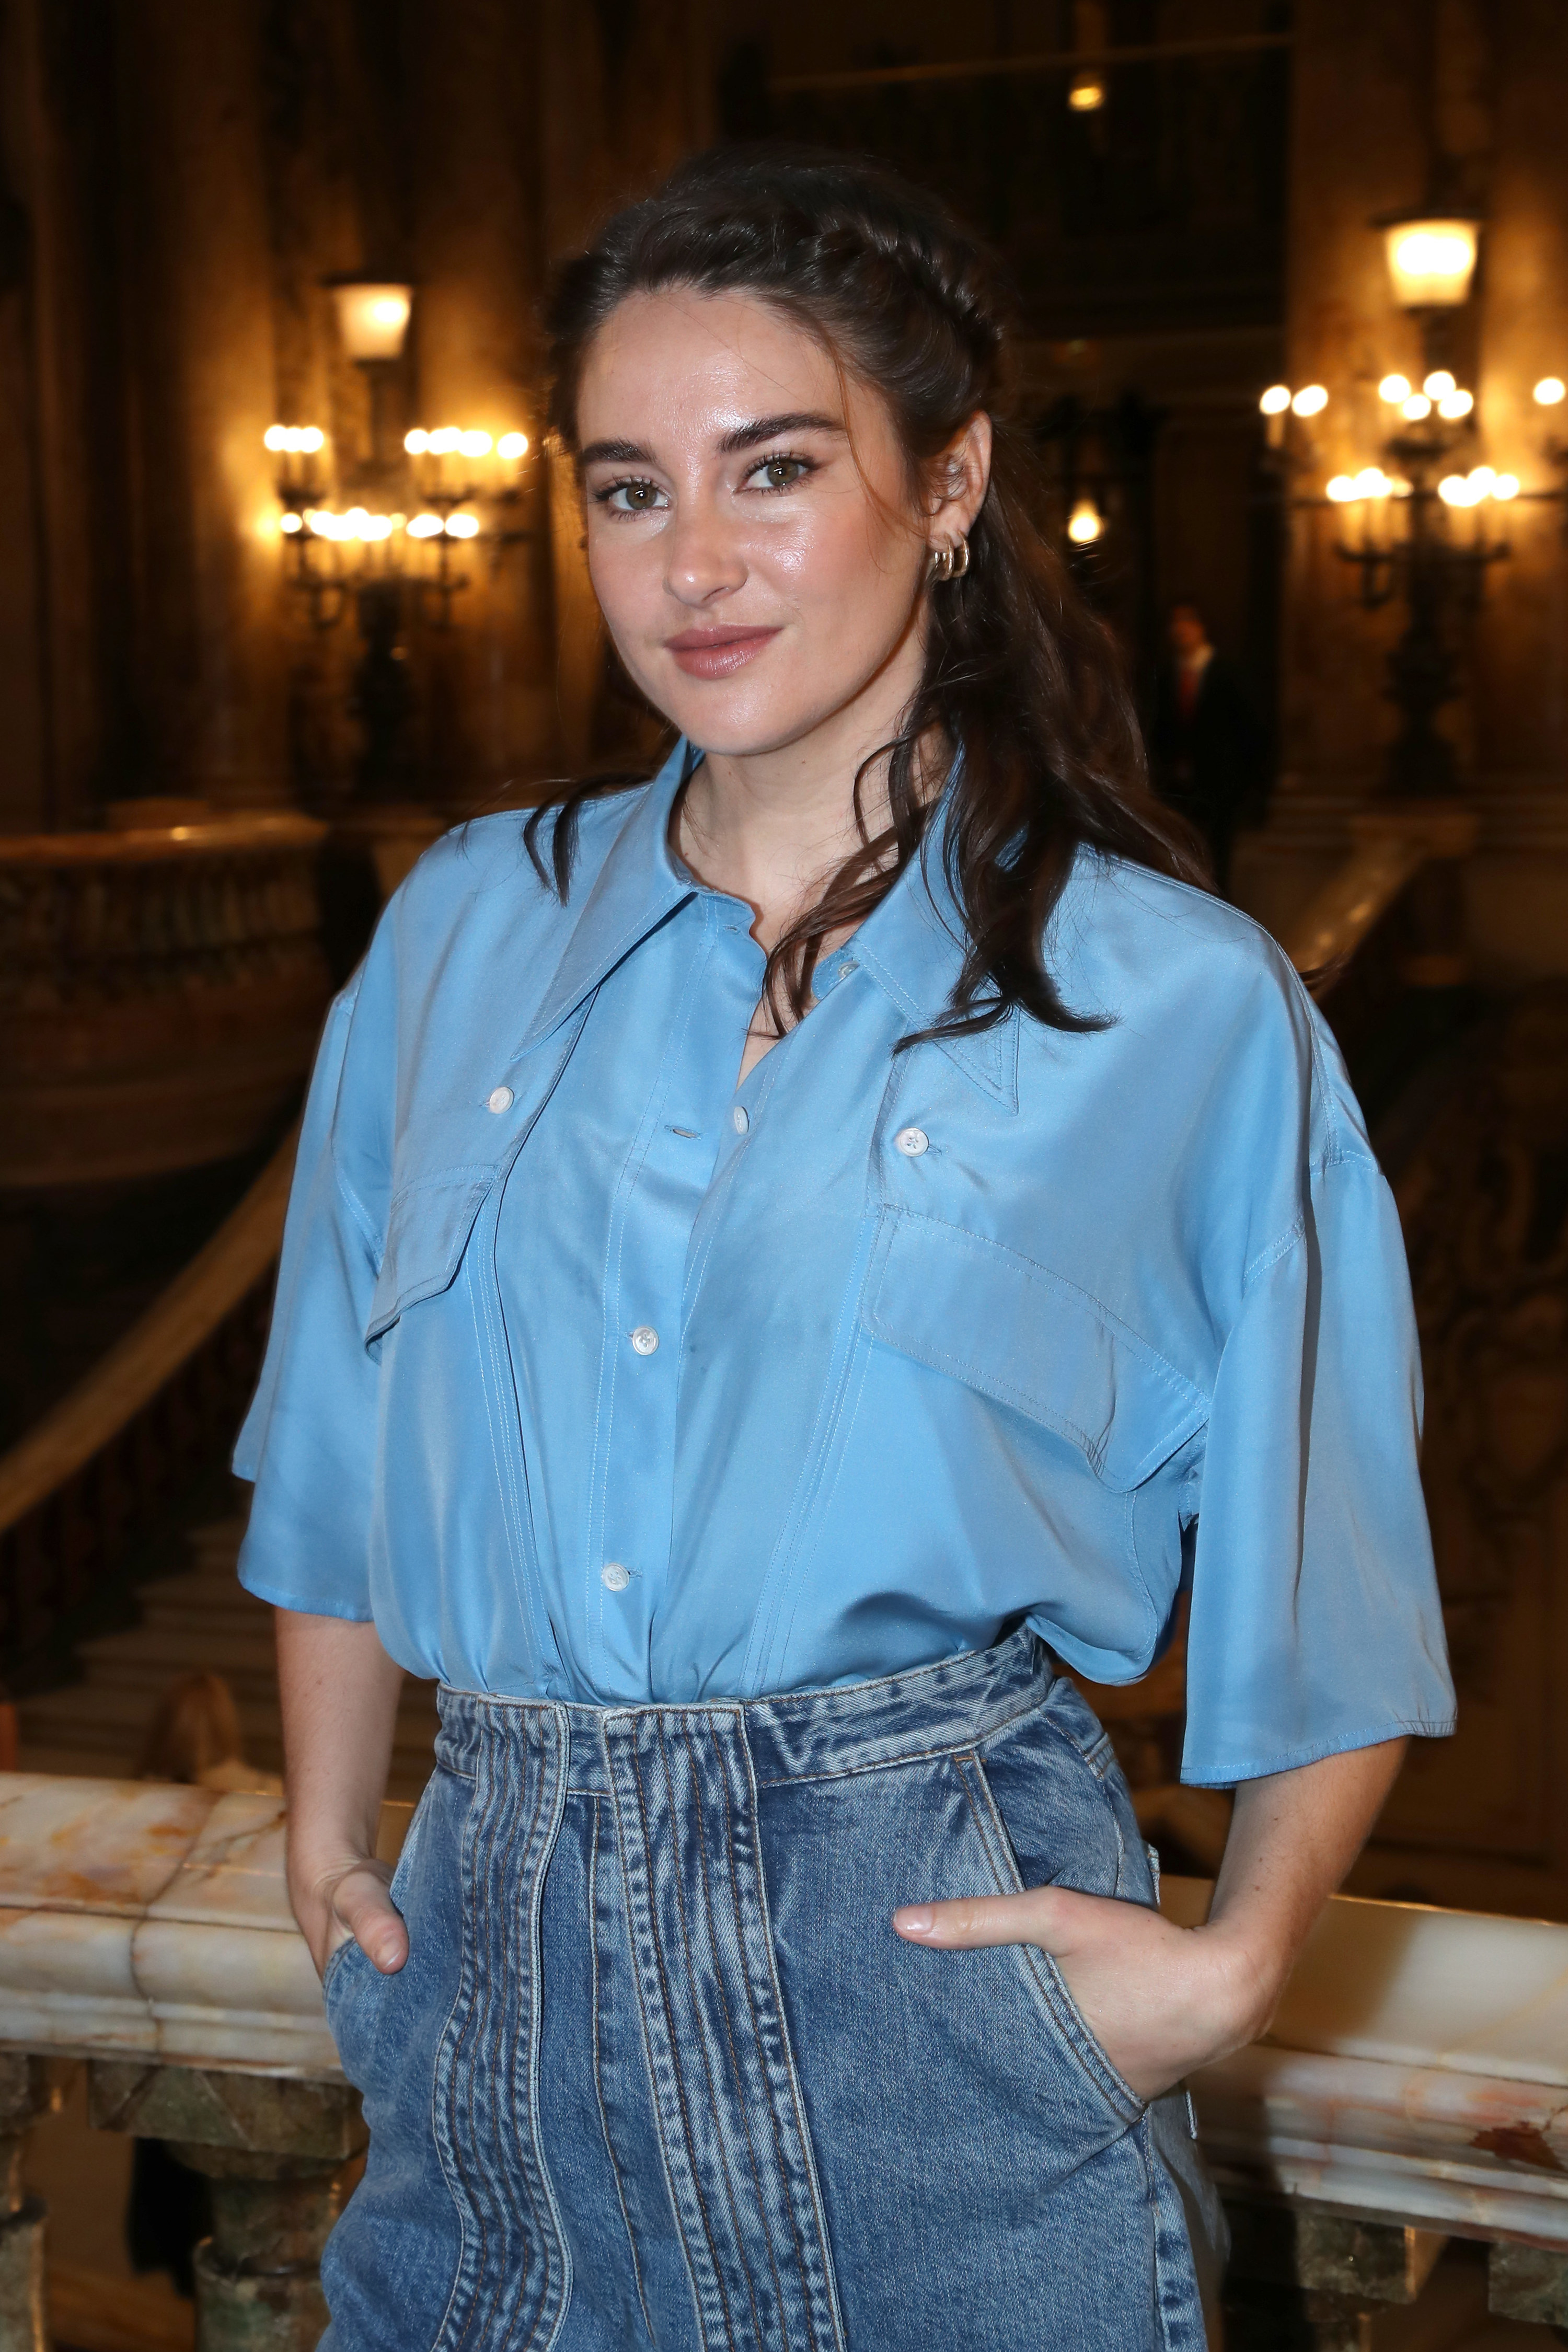 Shailene Woodley is pictured at a fashion show in Paris, France